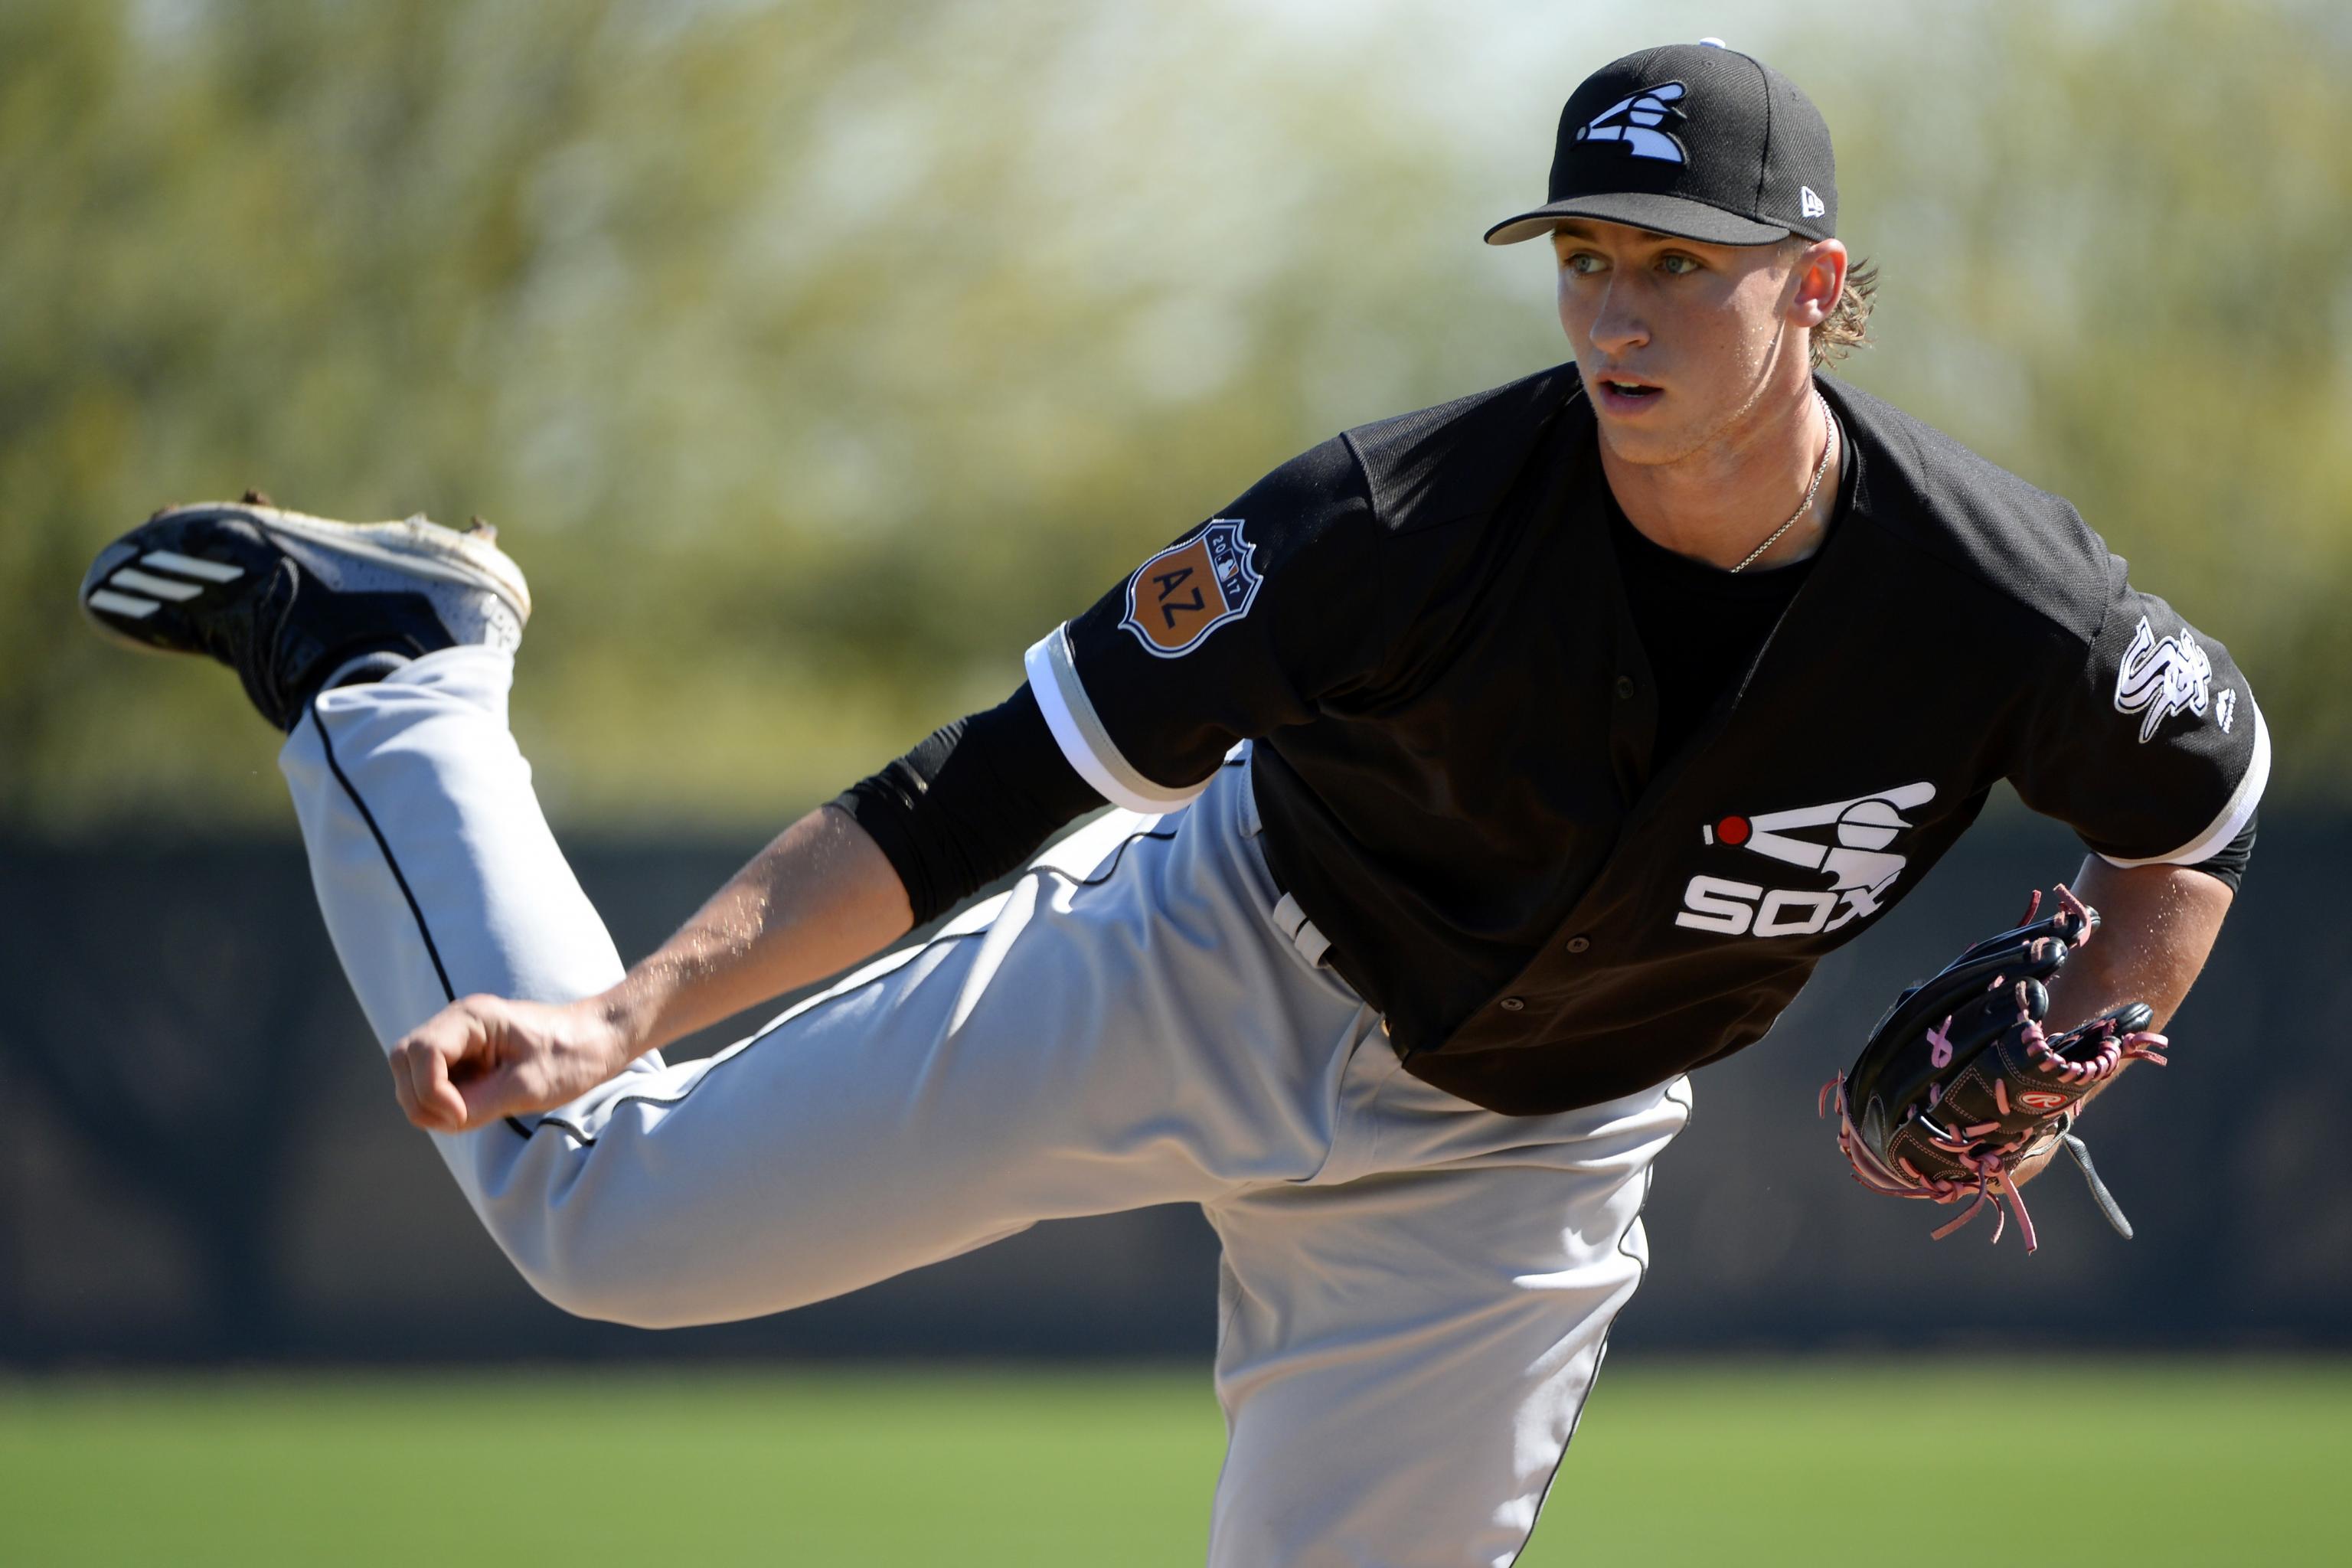 Michael Kopech again starts spring working back from injury, but